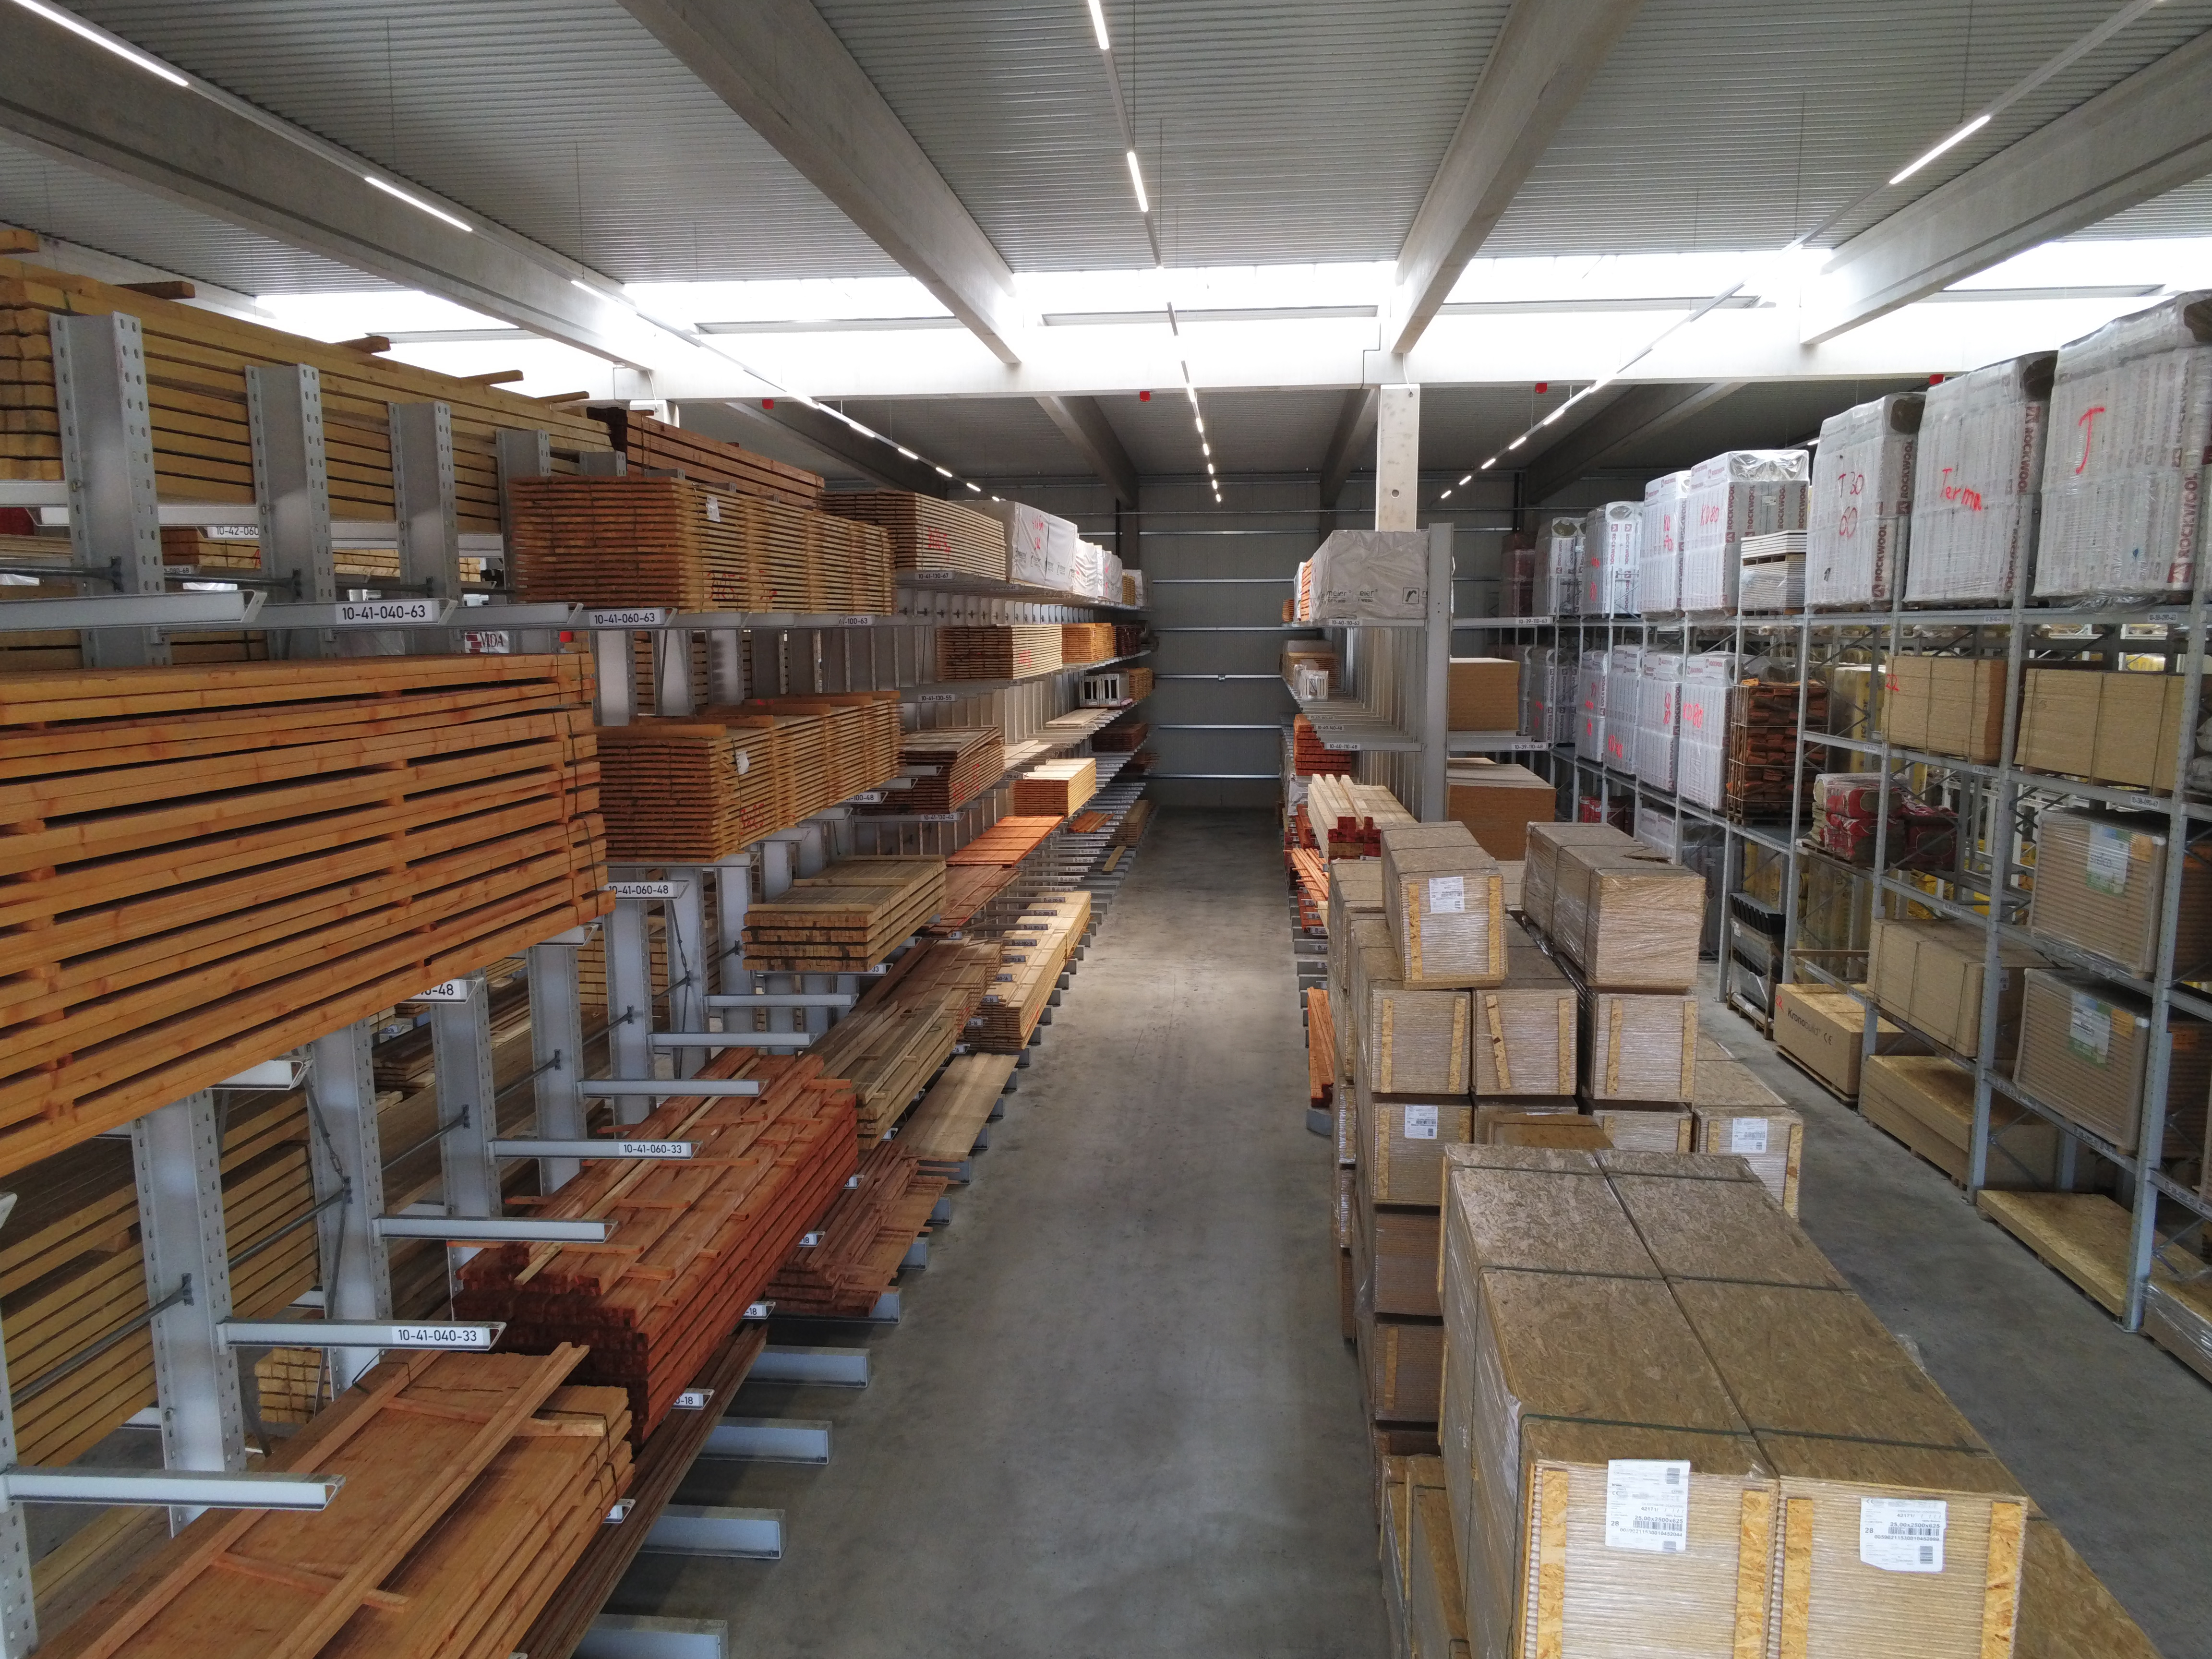 [Translate "Italien"] Cantilever racking building material